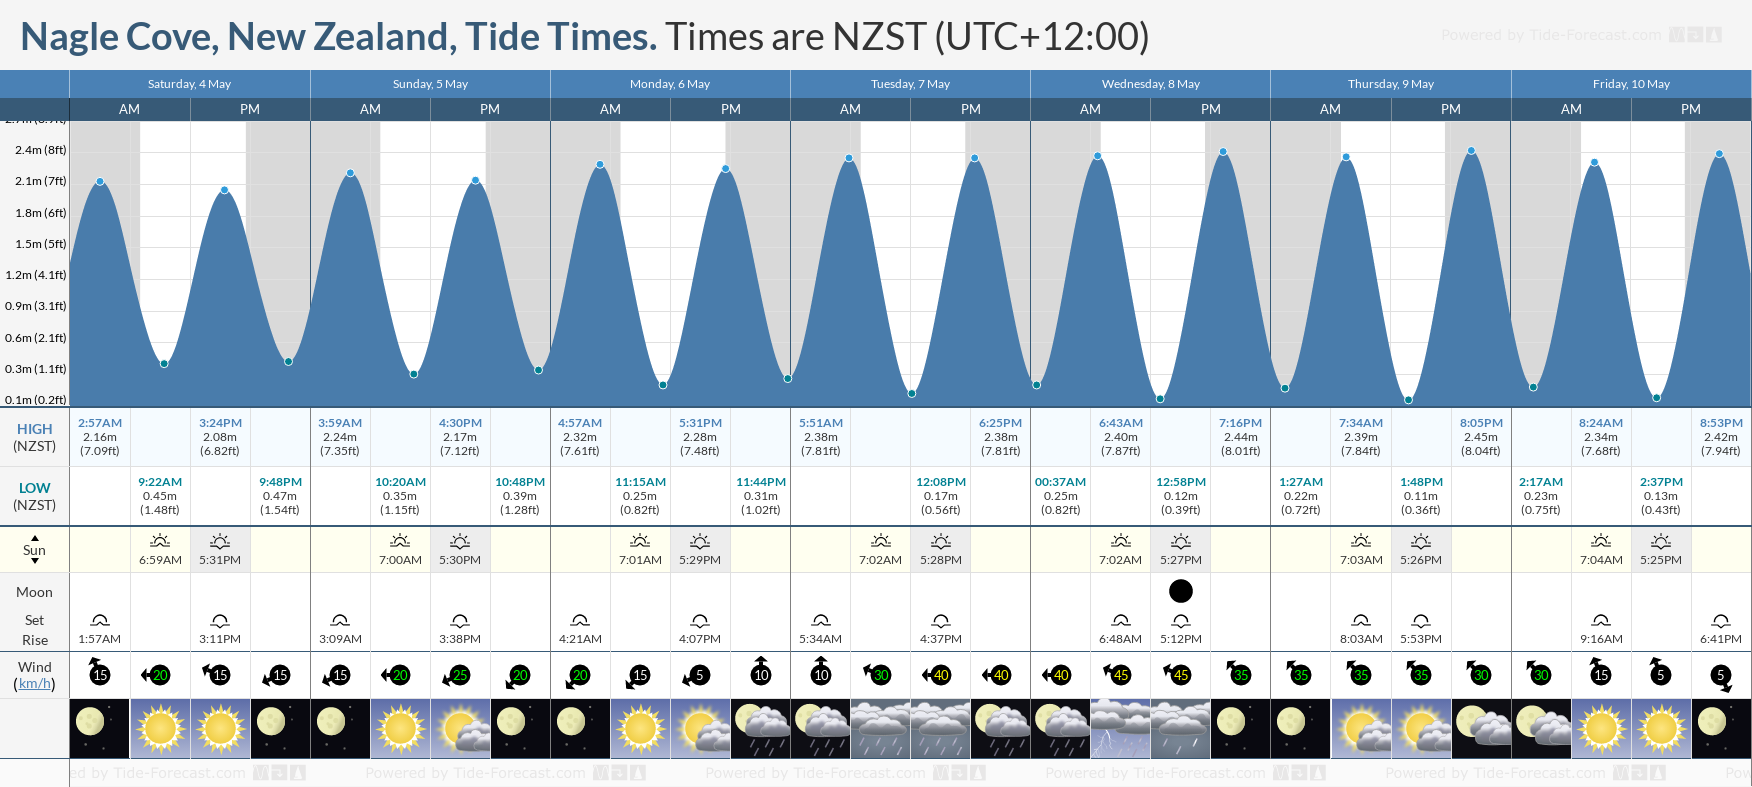 Nagle Cove, New Zealand Tide Chart including high and low tide tide times for the next 7 days